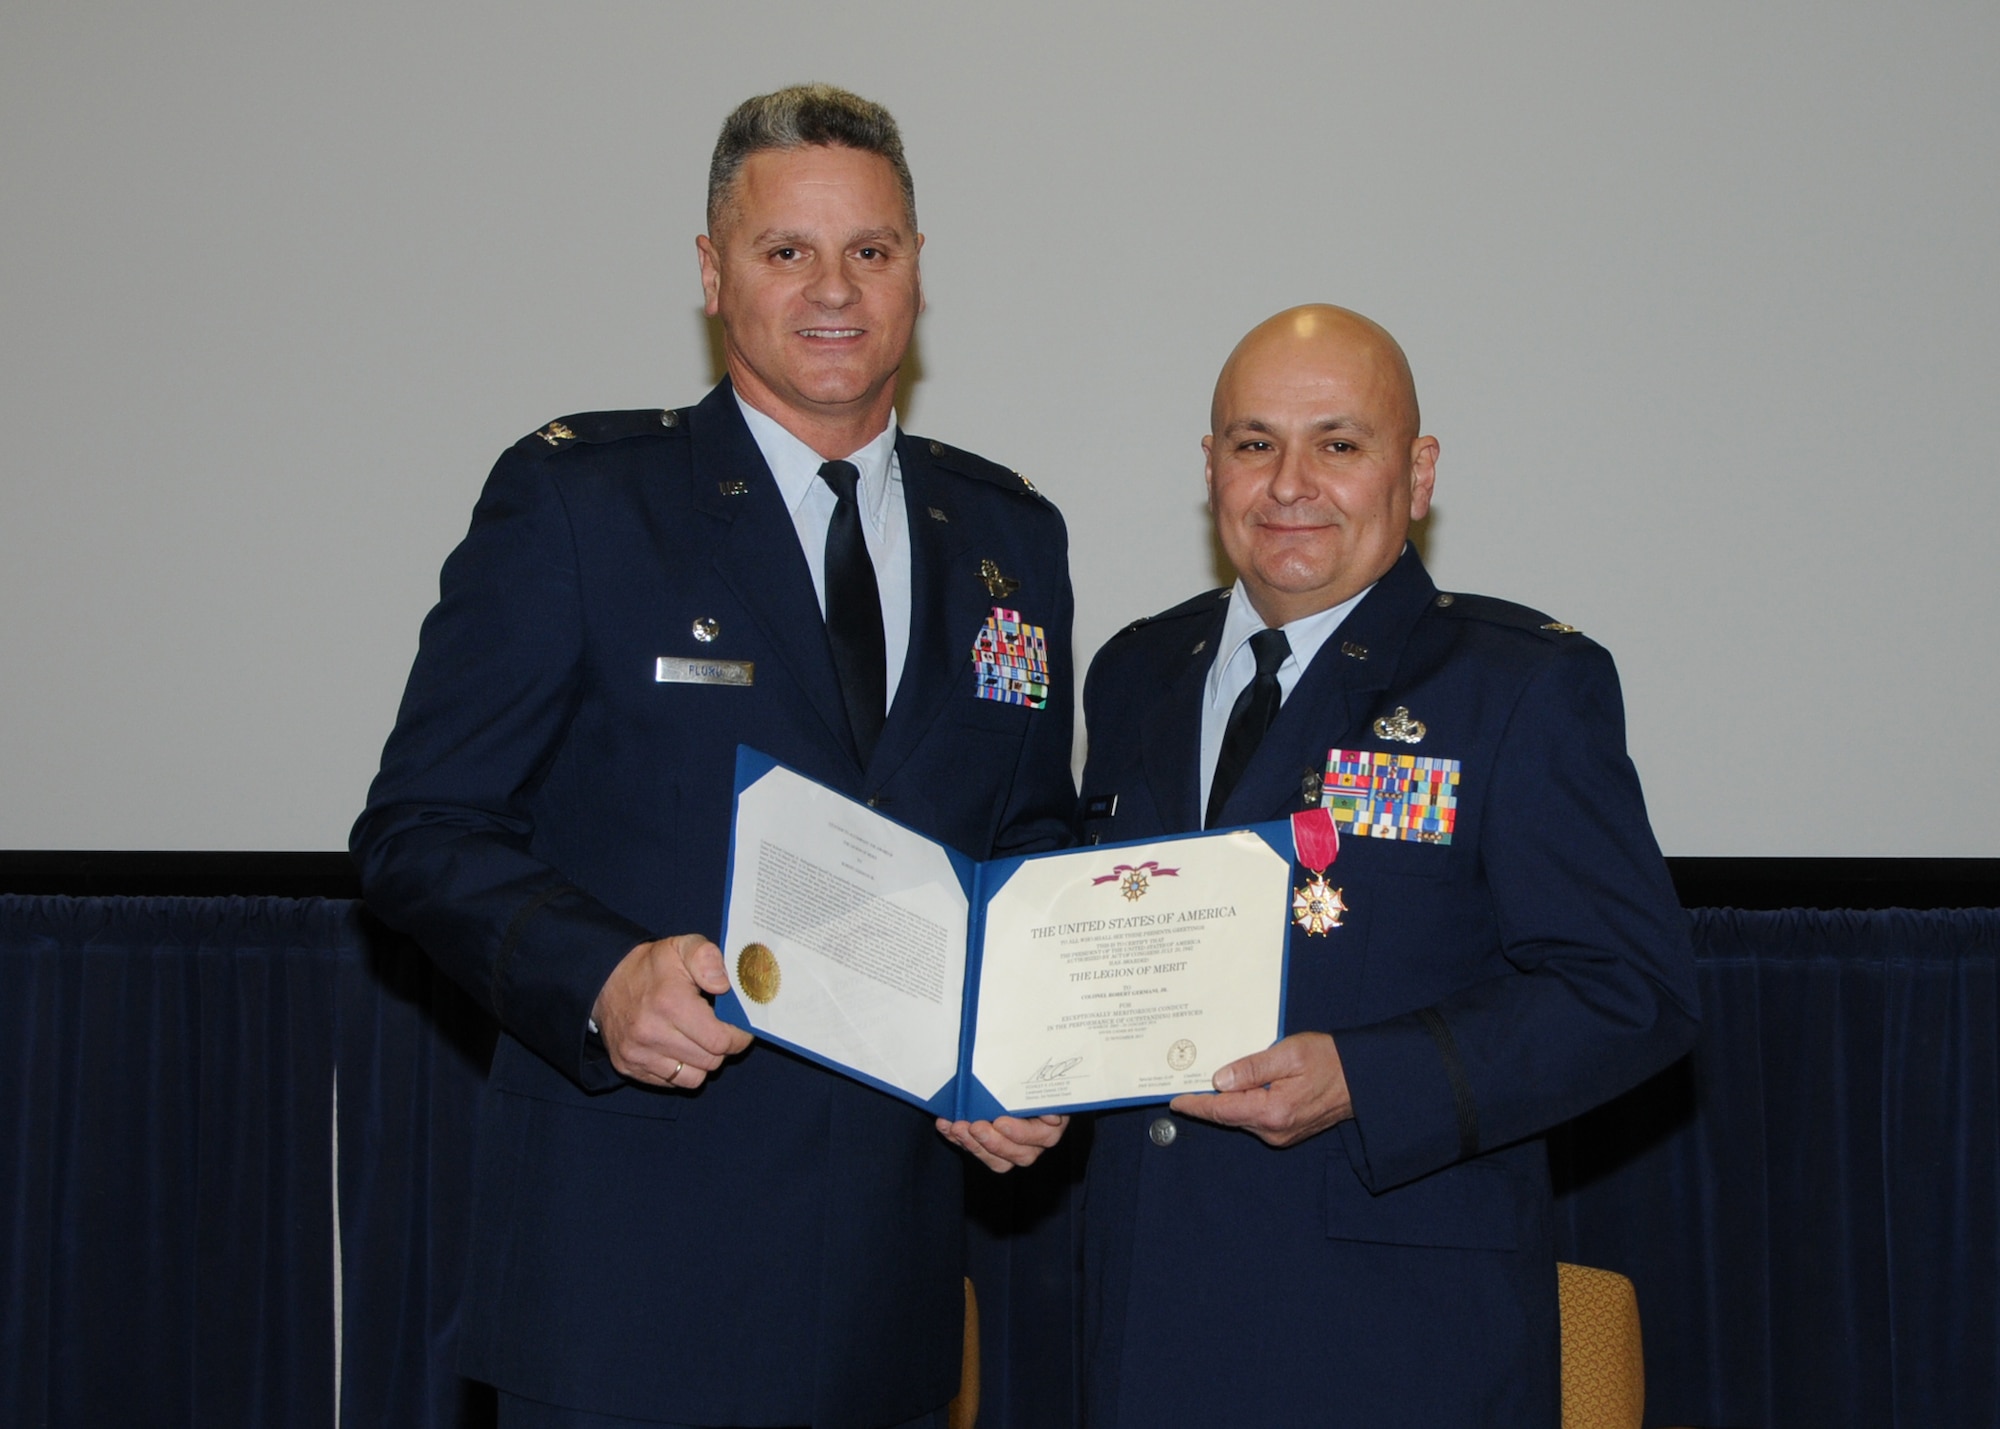 Colonel Arthur Floru (right), 143d Airlift Wing Commander, presents Colonel Robert Germani Jr. (left), outgoing 143d Airlift Wing Vice Commander with the Legion of Merit upon his retirement after 34 years of dedicated service to the Rhode Island National Guard. National Guard Photo by Technical Sgt Jason Long (RELEASED)